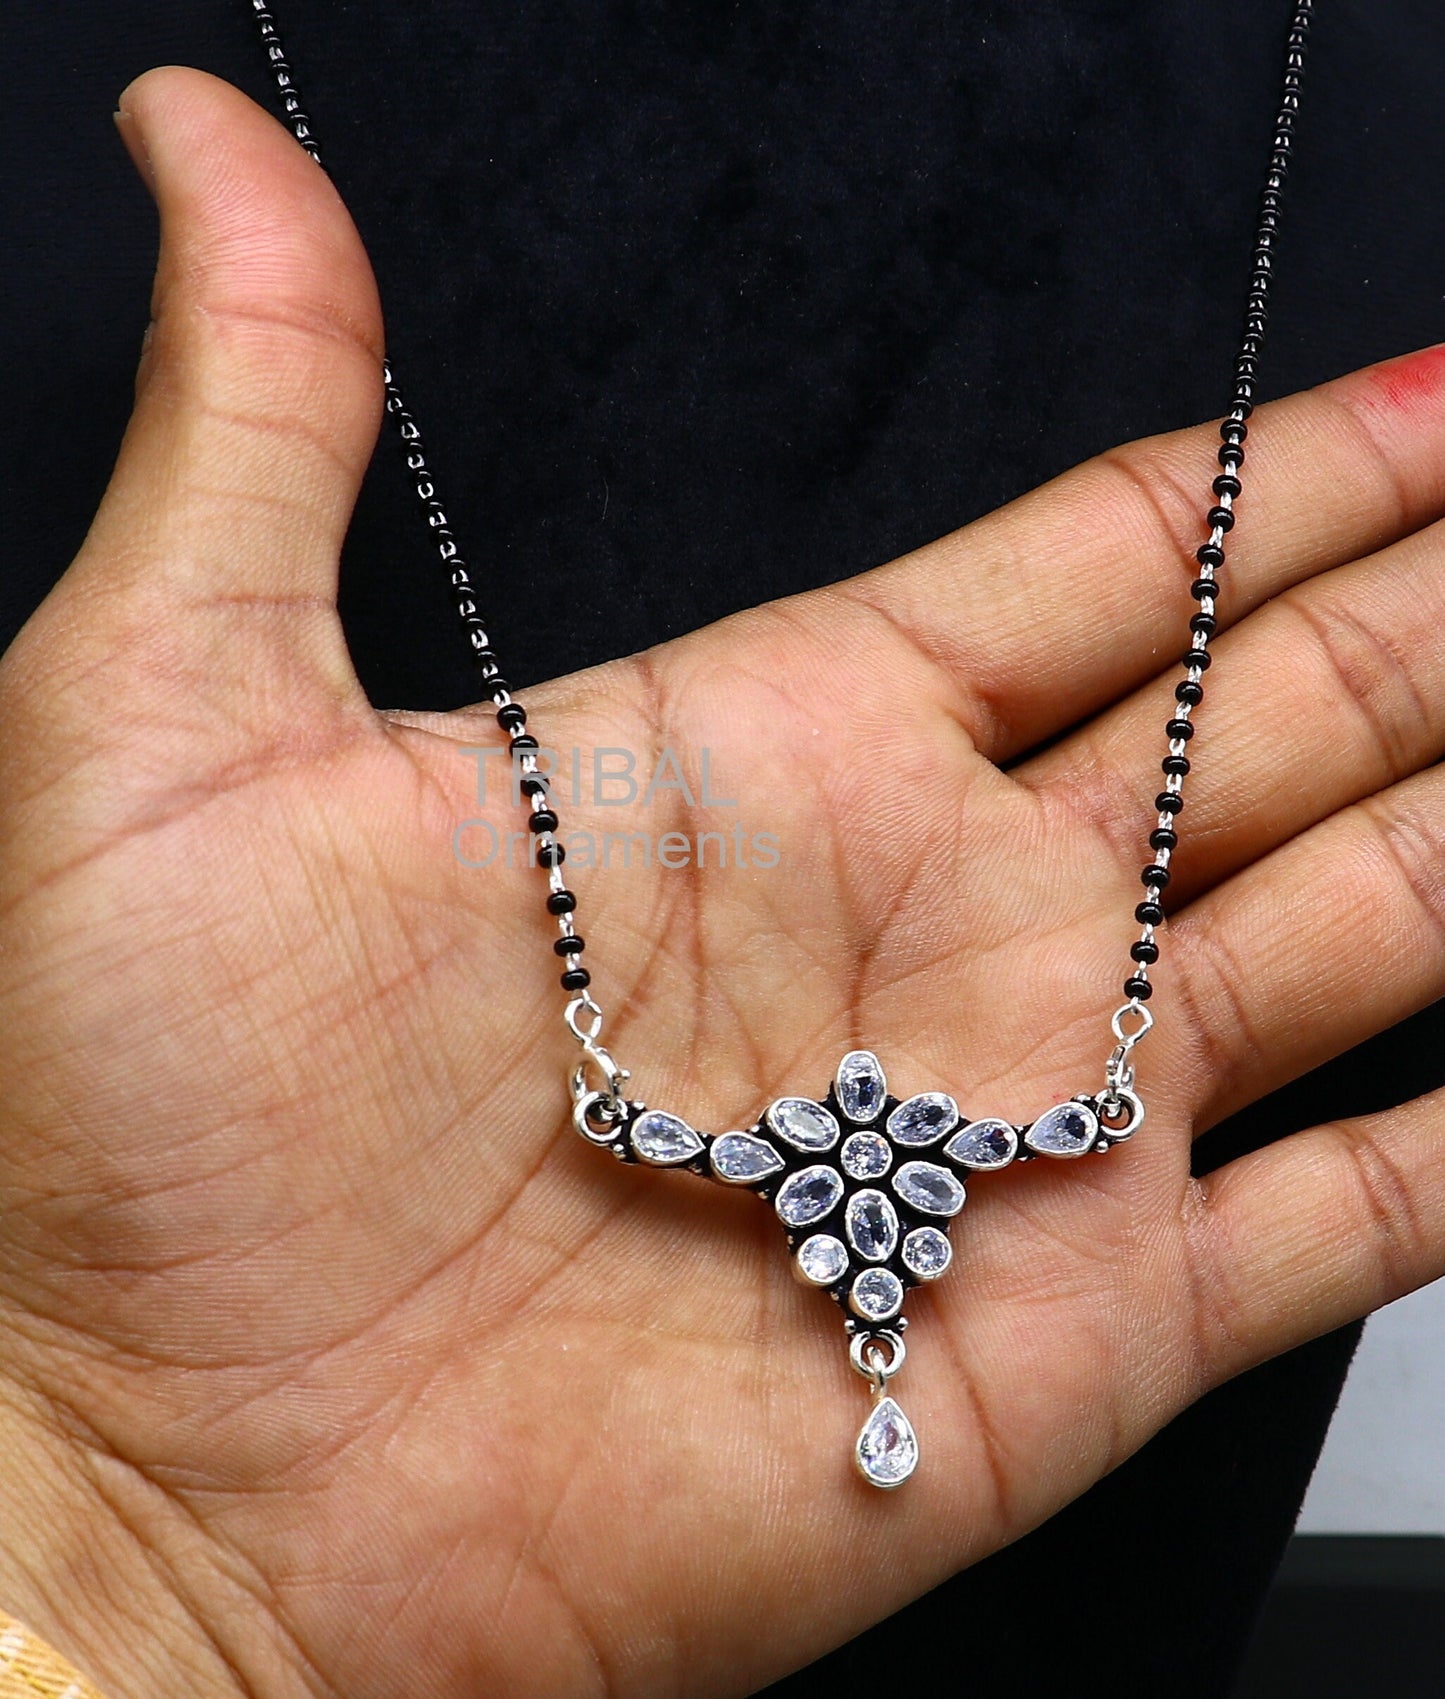 Cultural trendy style 925 sterling silver black beads mangal sutra necklace daily use brides Mangalsutra chunky necklace Mangal Sutra ms29 - TRIBAL ORNAMENTS